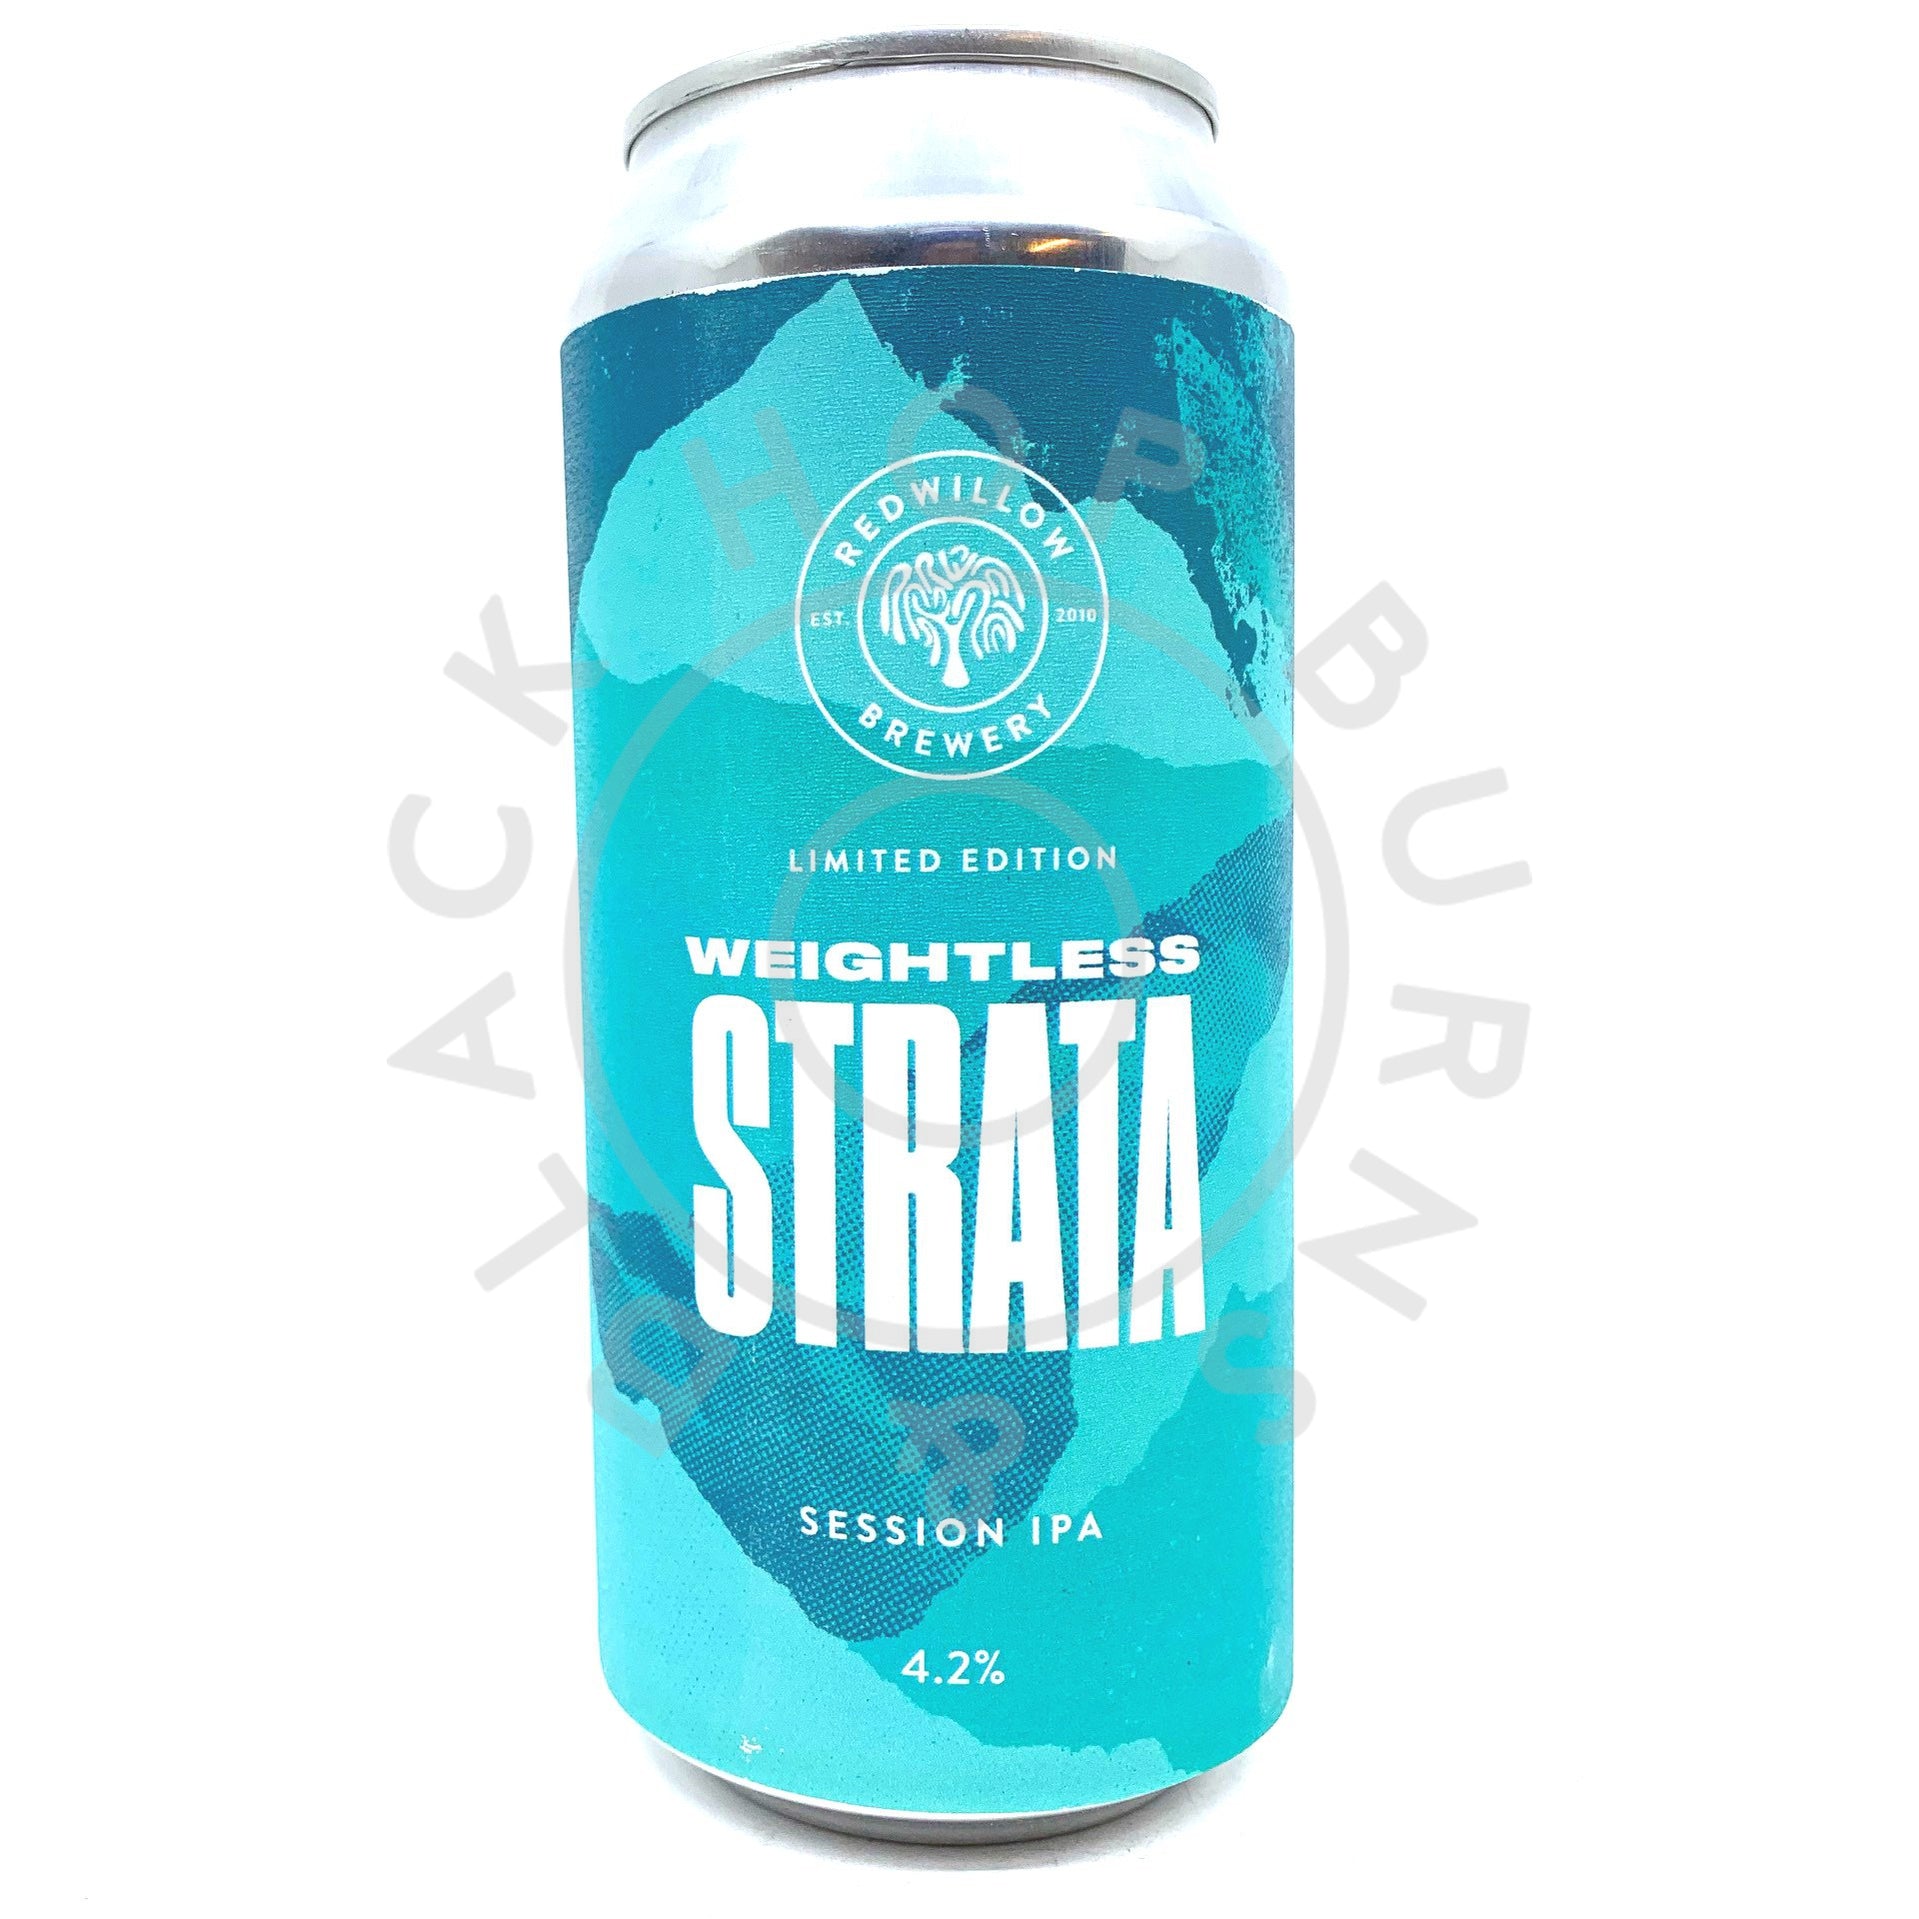 Redwillow Weightless Strata Session IPA 4.2% (440ml can)-Hop Burns & Black